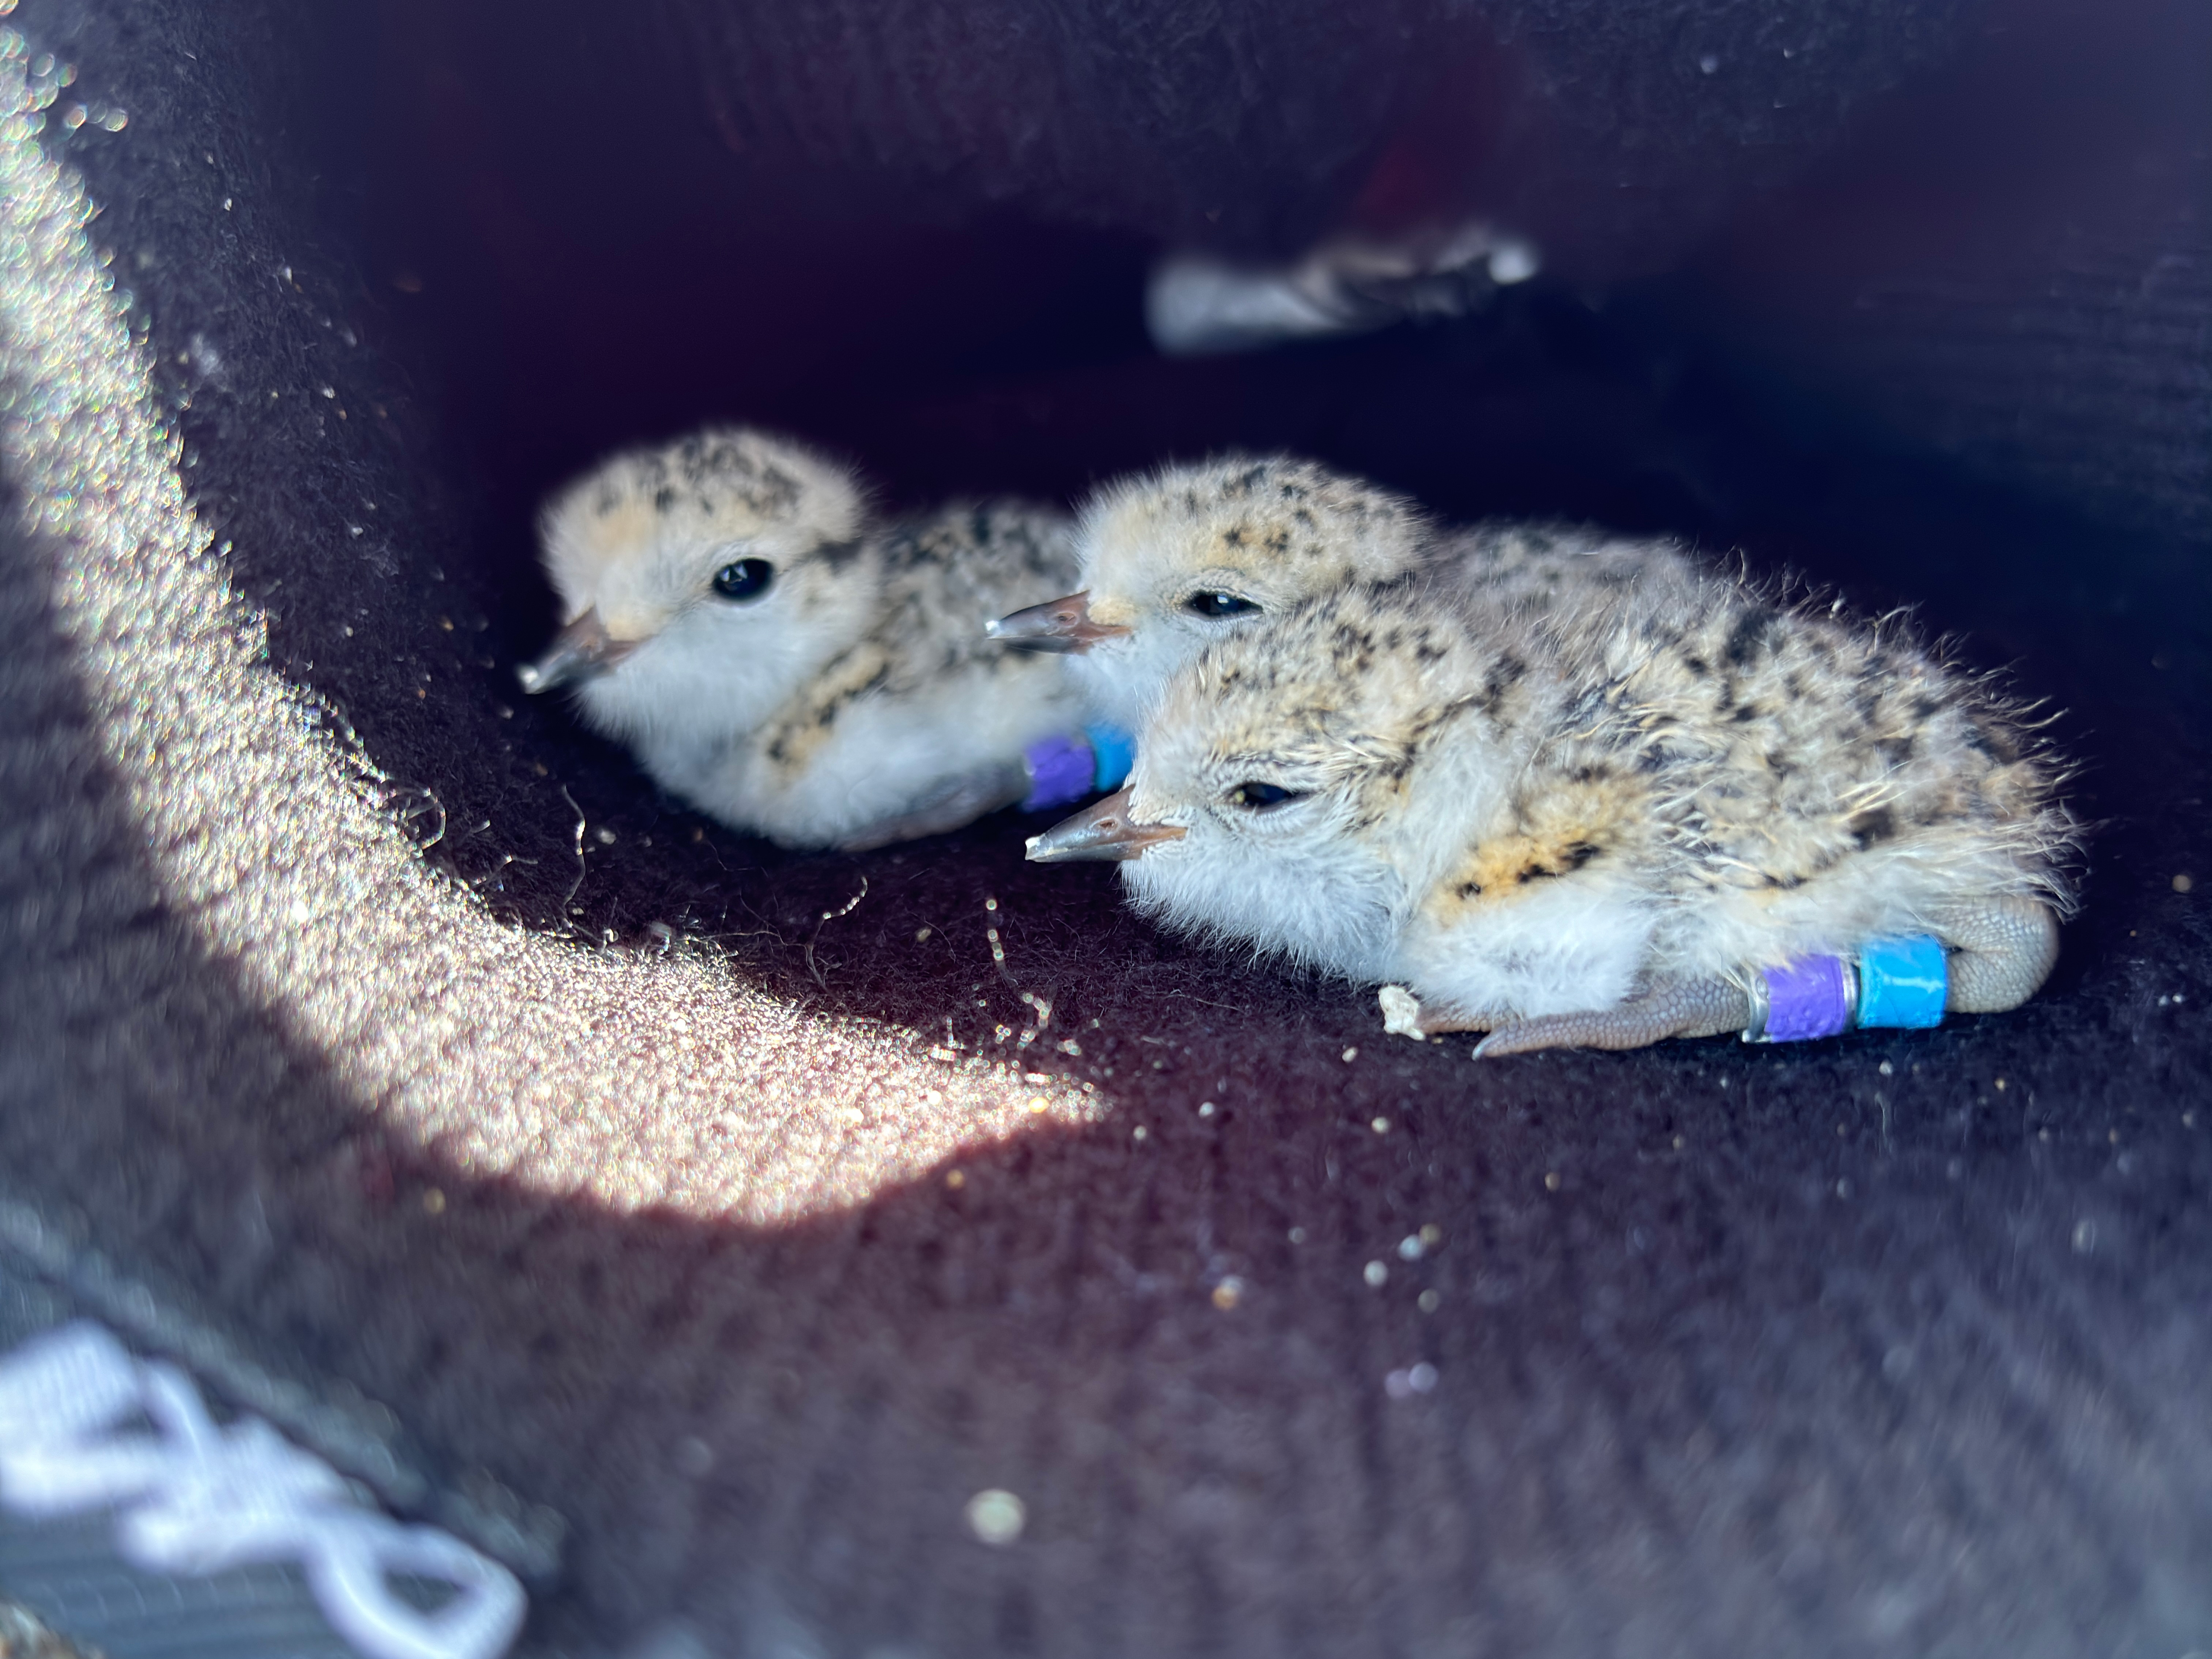 A photo of three small black-speckled, beige-colored shorebird chicks sitting in a blue beanie.